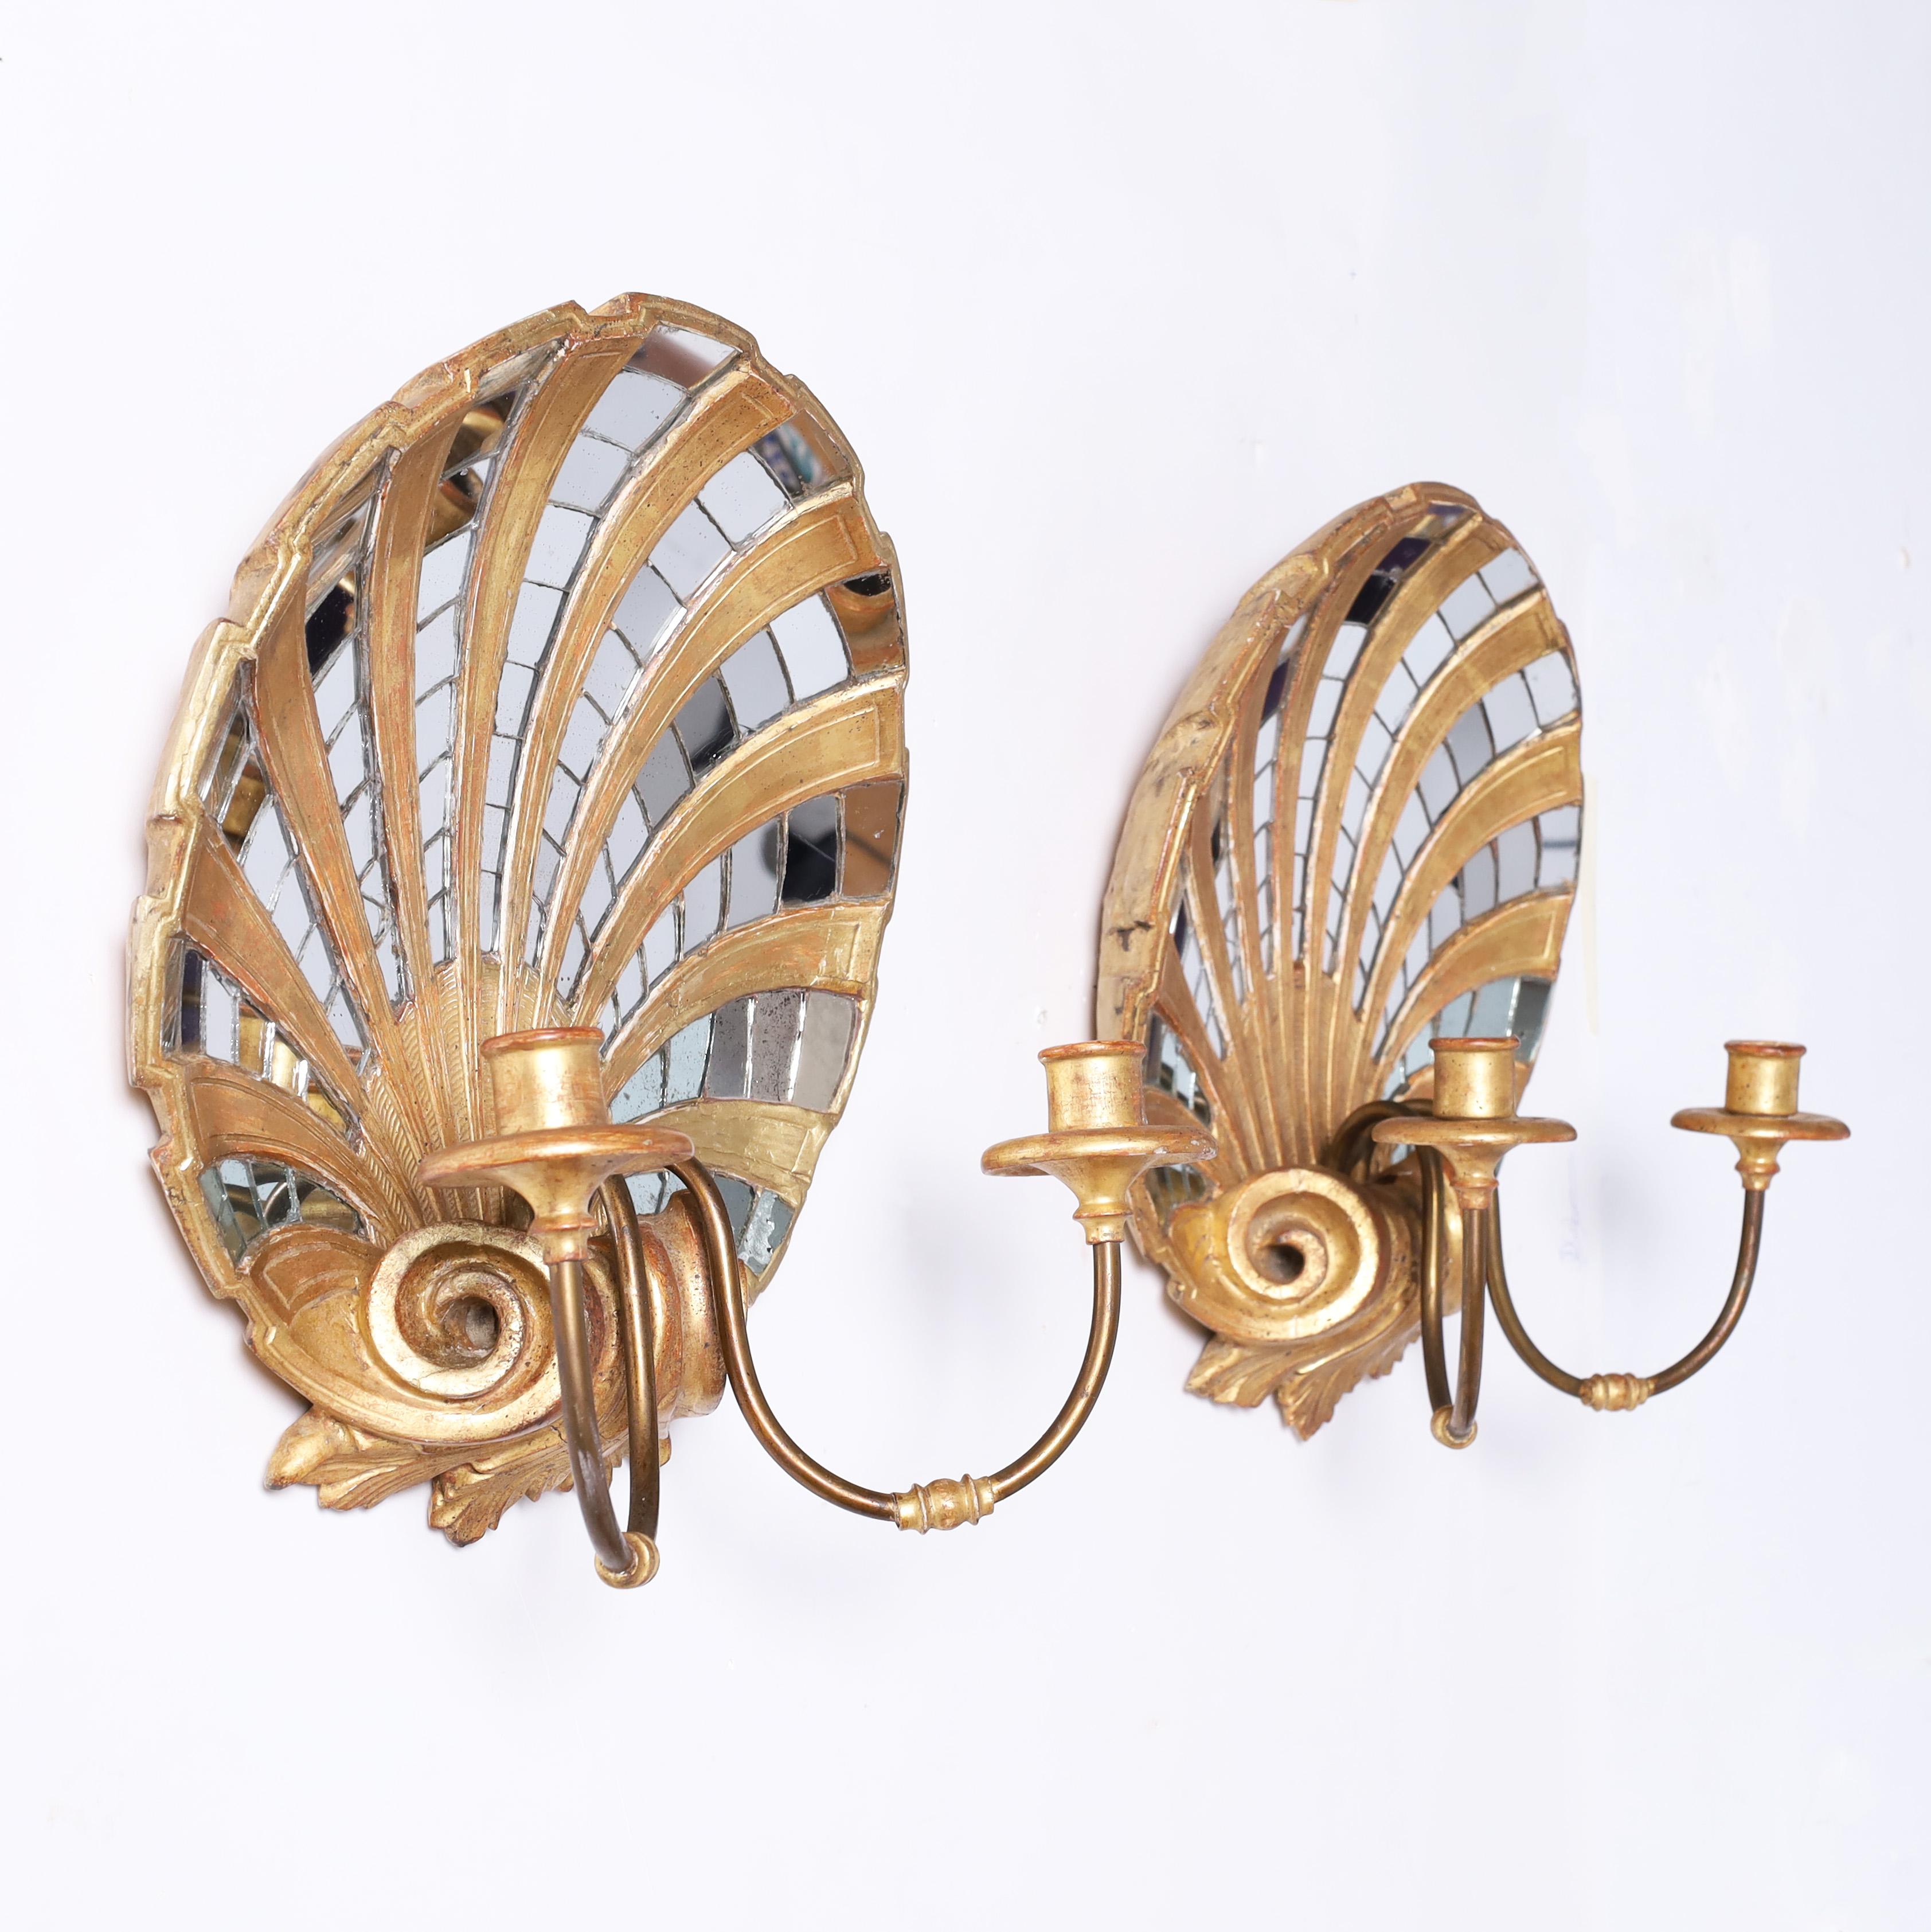 Enchanting pair of Italian grotto style wall sconces hand crafted in carved wood in a neoclassical gilt shell motif decorated with a mirror mosaic over two elegant metal arms with gilt wood candle cups.